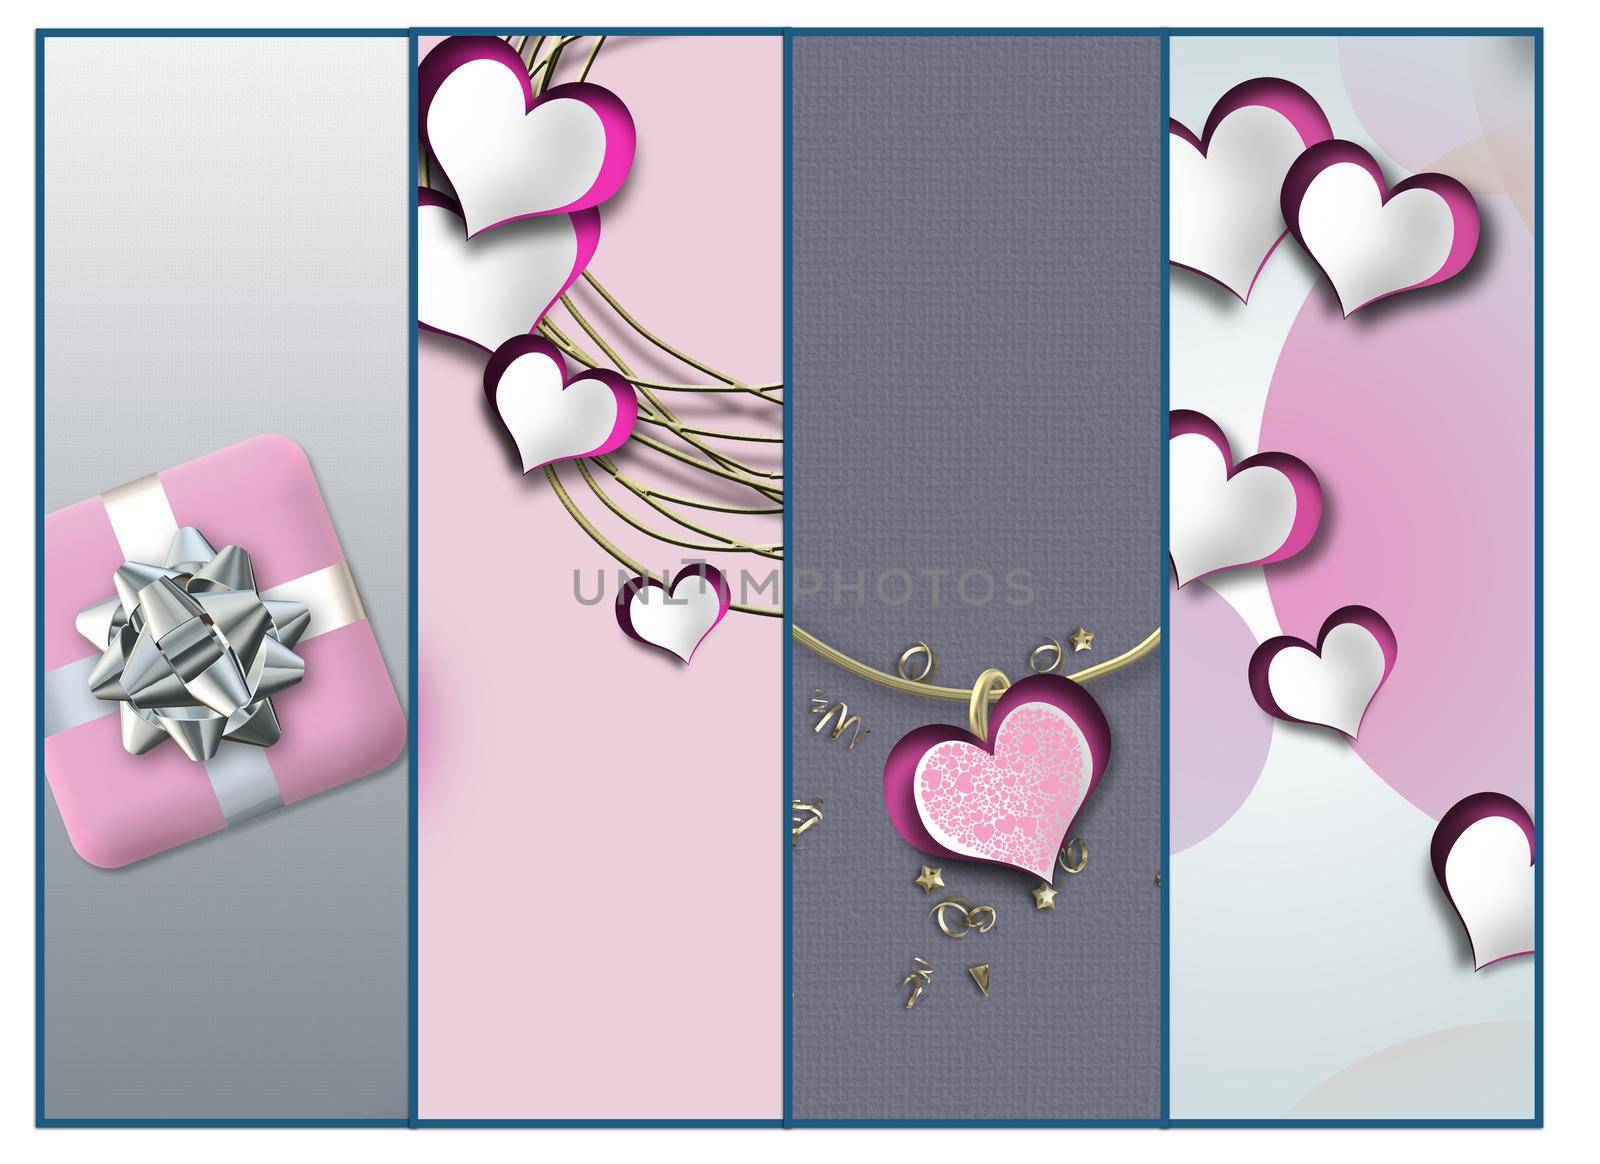 valentines day pastel collage, hearts. Elegant set of cards with hearts. Valentines template, border, mock up. place for text. 3d illustration